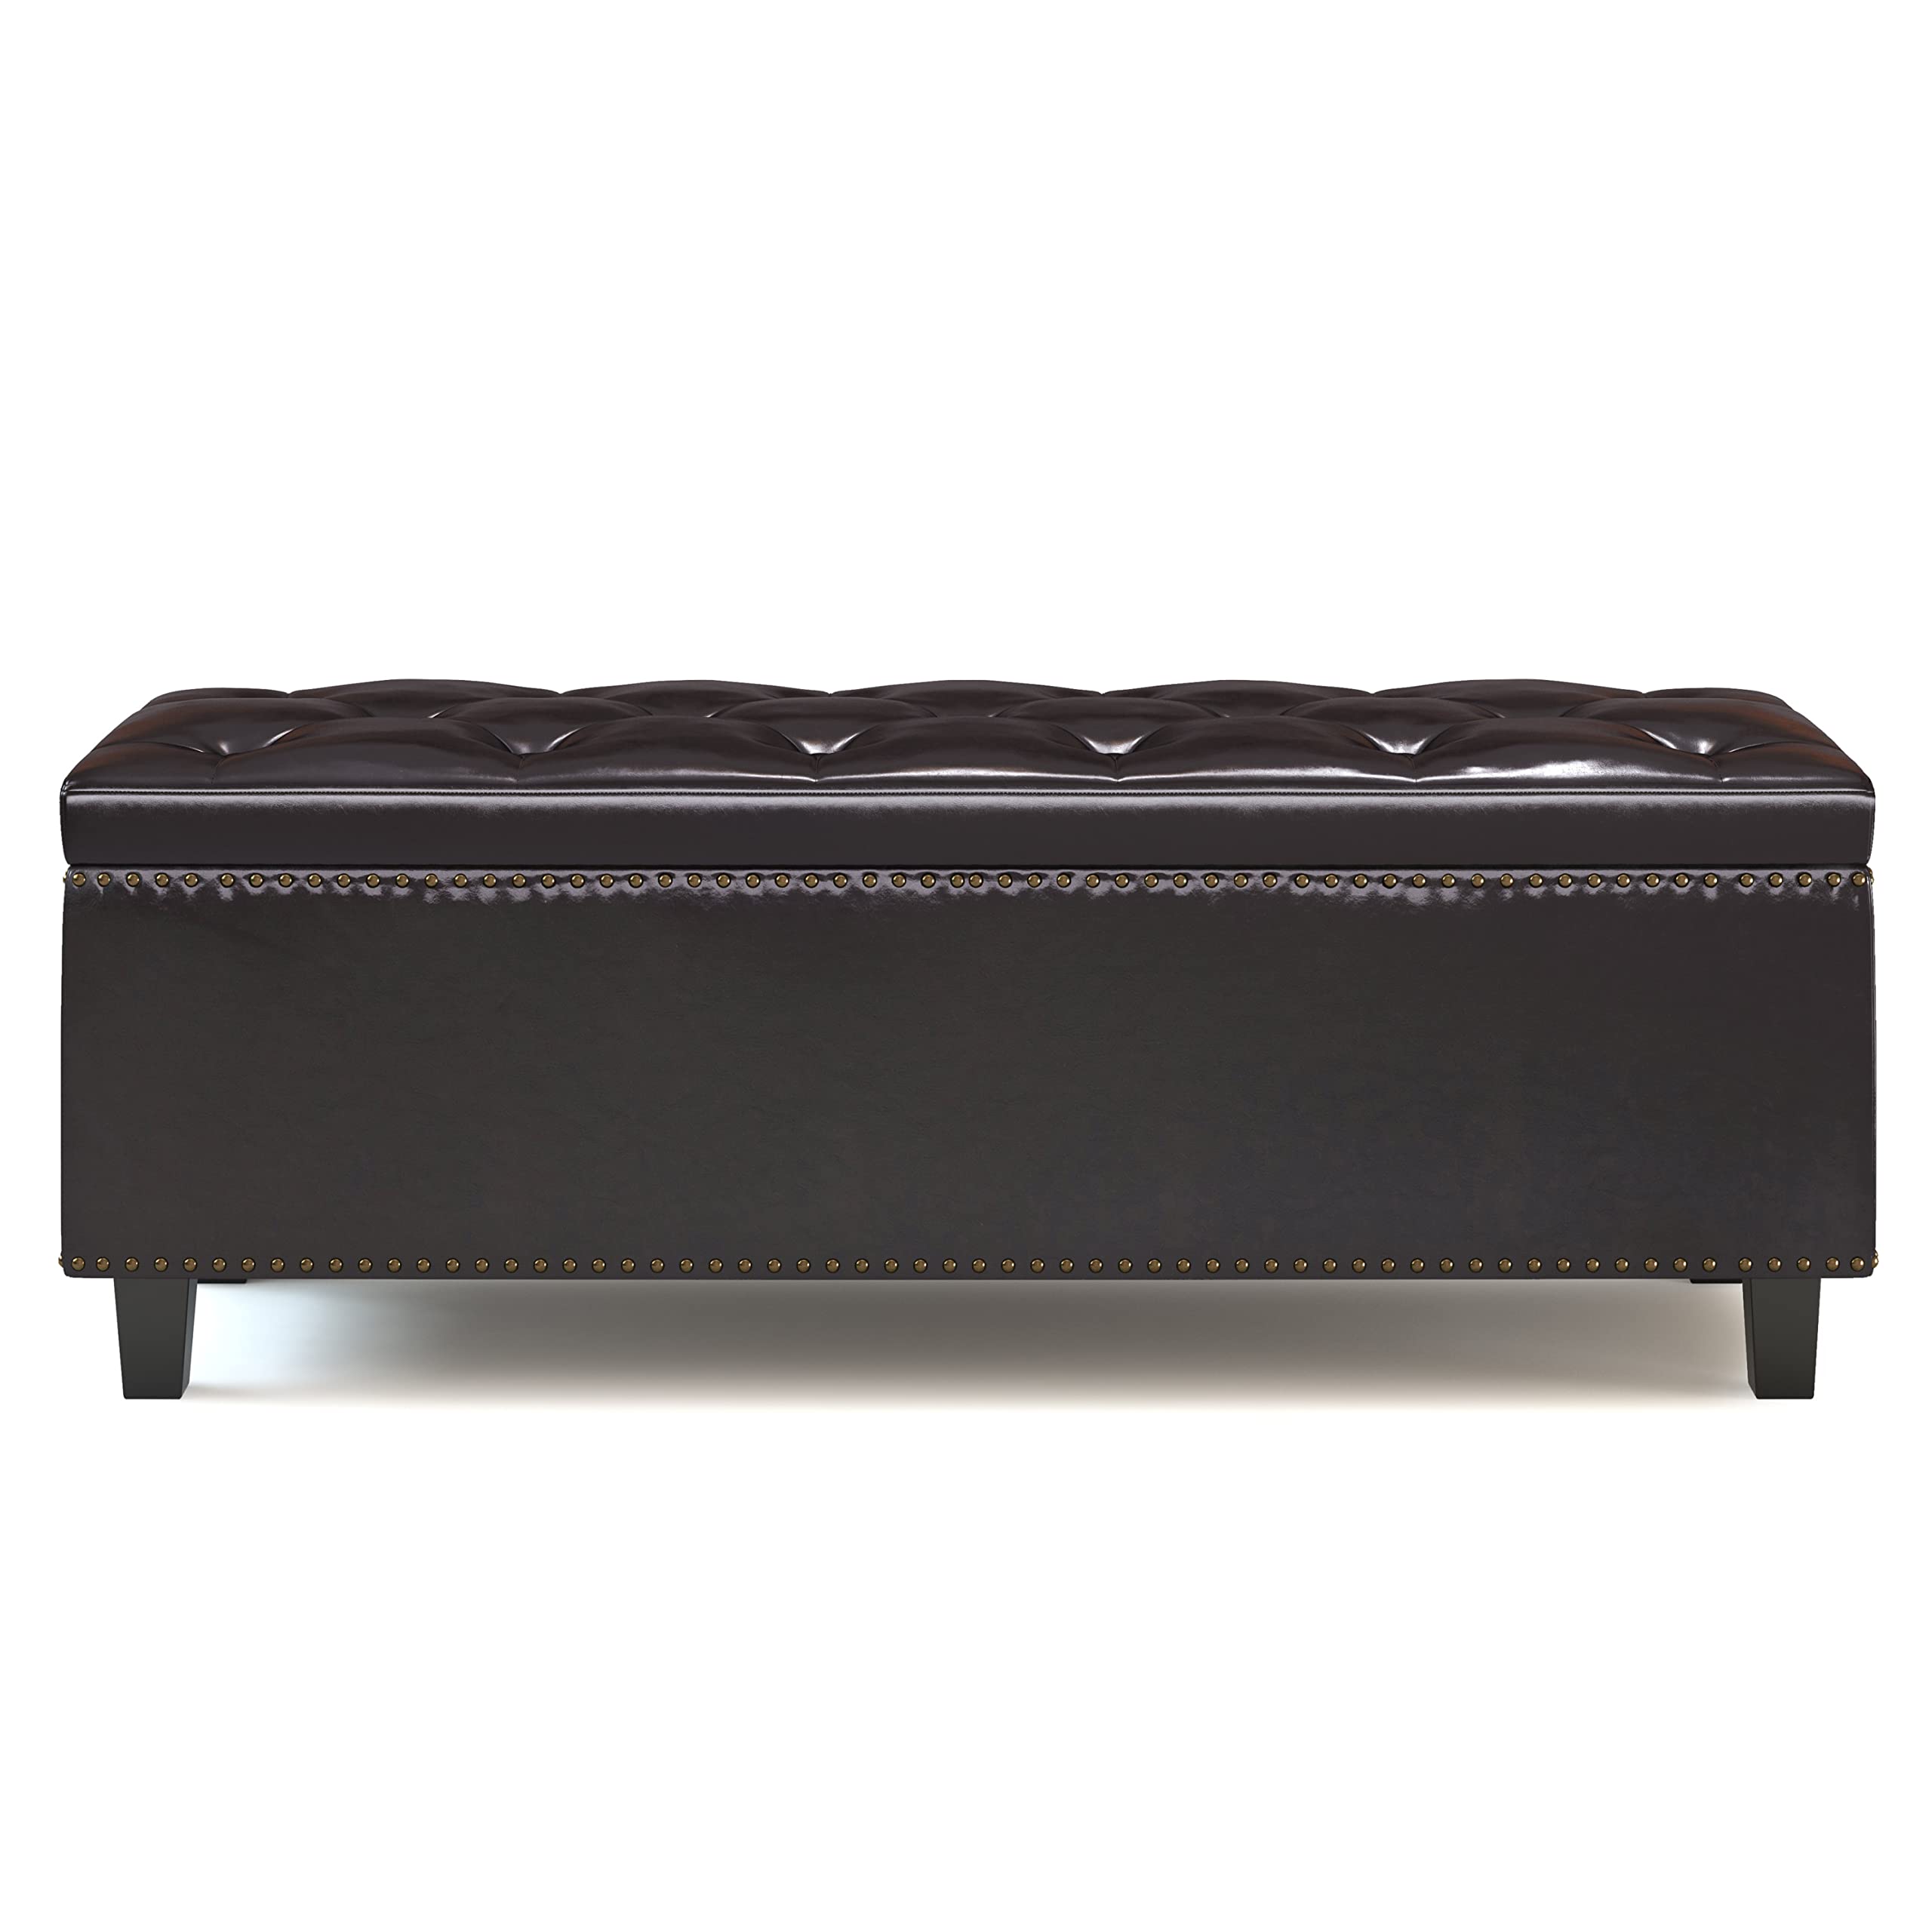 SIMPLIHOME Heatherton 48 Inch Wide Traditional Rectangle Storage Ottoman in Tanners Brown Vegan Faux Leather, For the Living Room and Bedroom